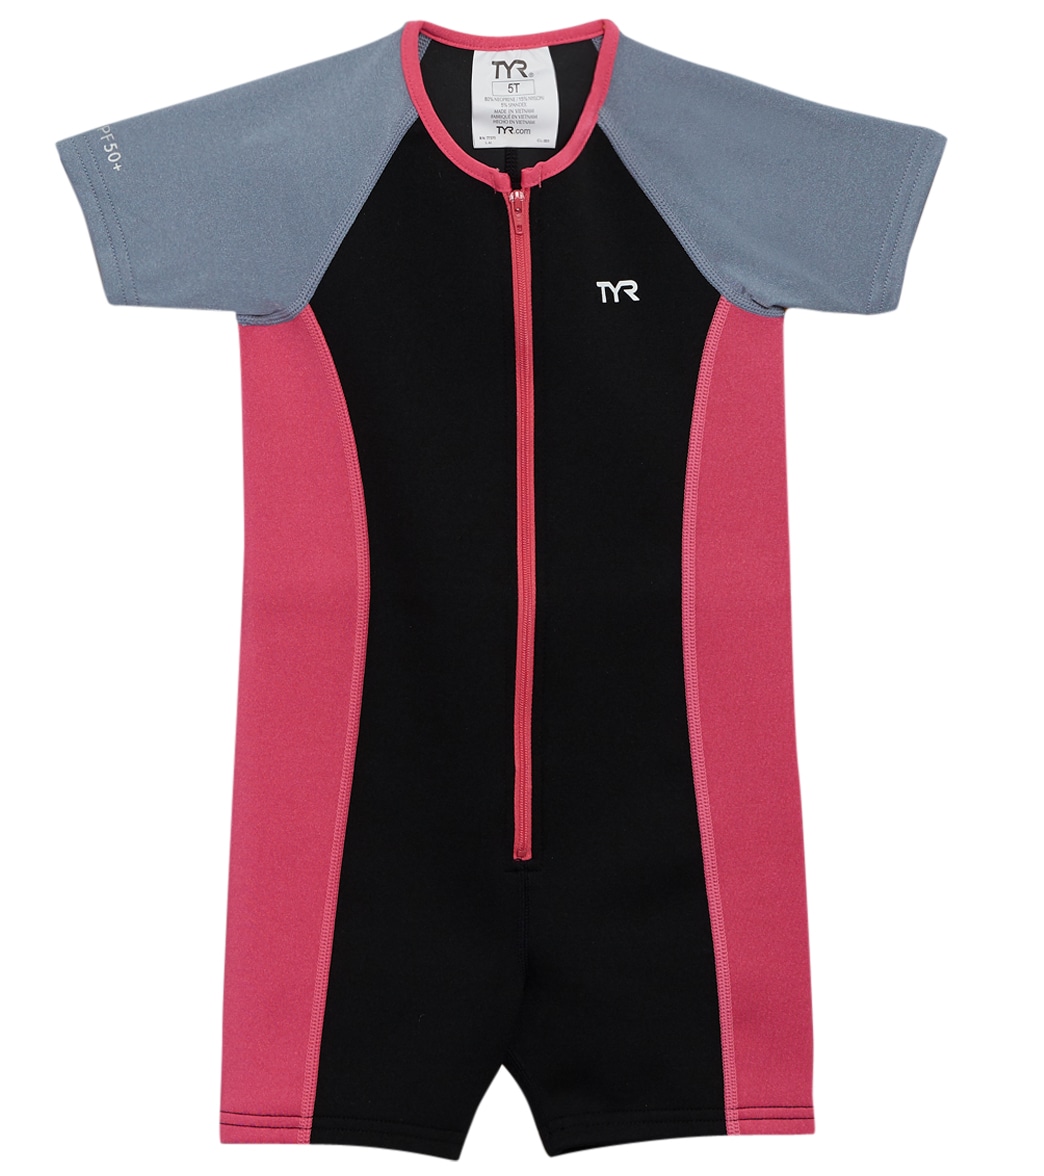 TYR Girls' Upf 50+ Short Sleeve Solid Thermal Suit Toddler/Little/Big Kid - Black/Grey/Pink 4T - Swimoutlet.com